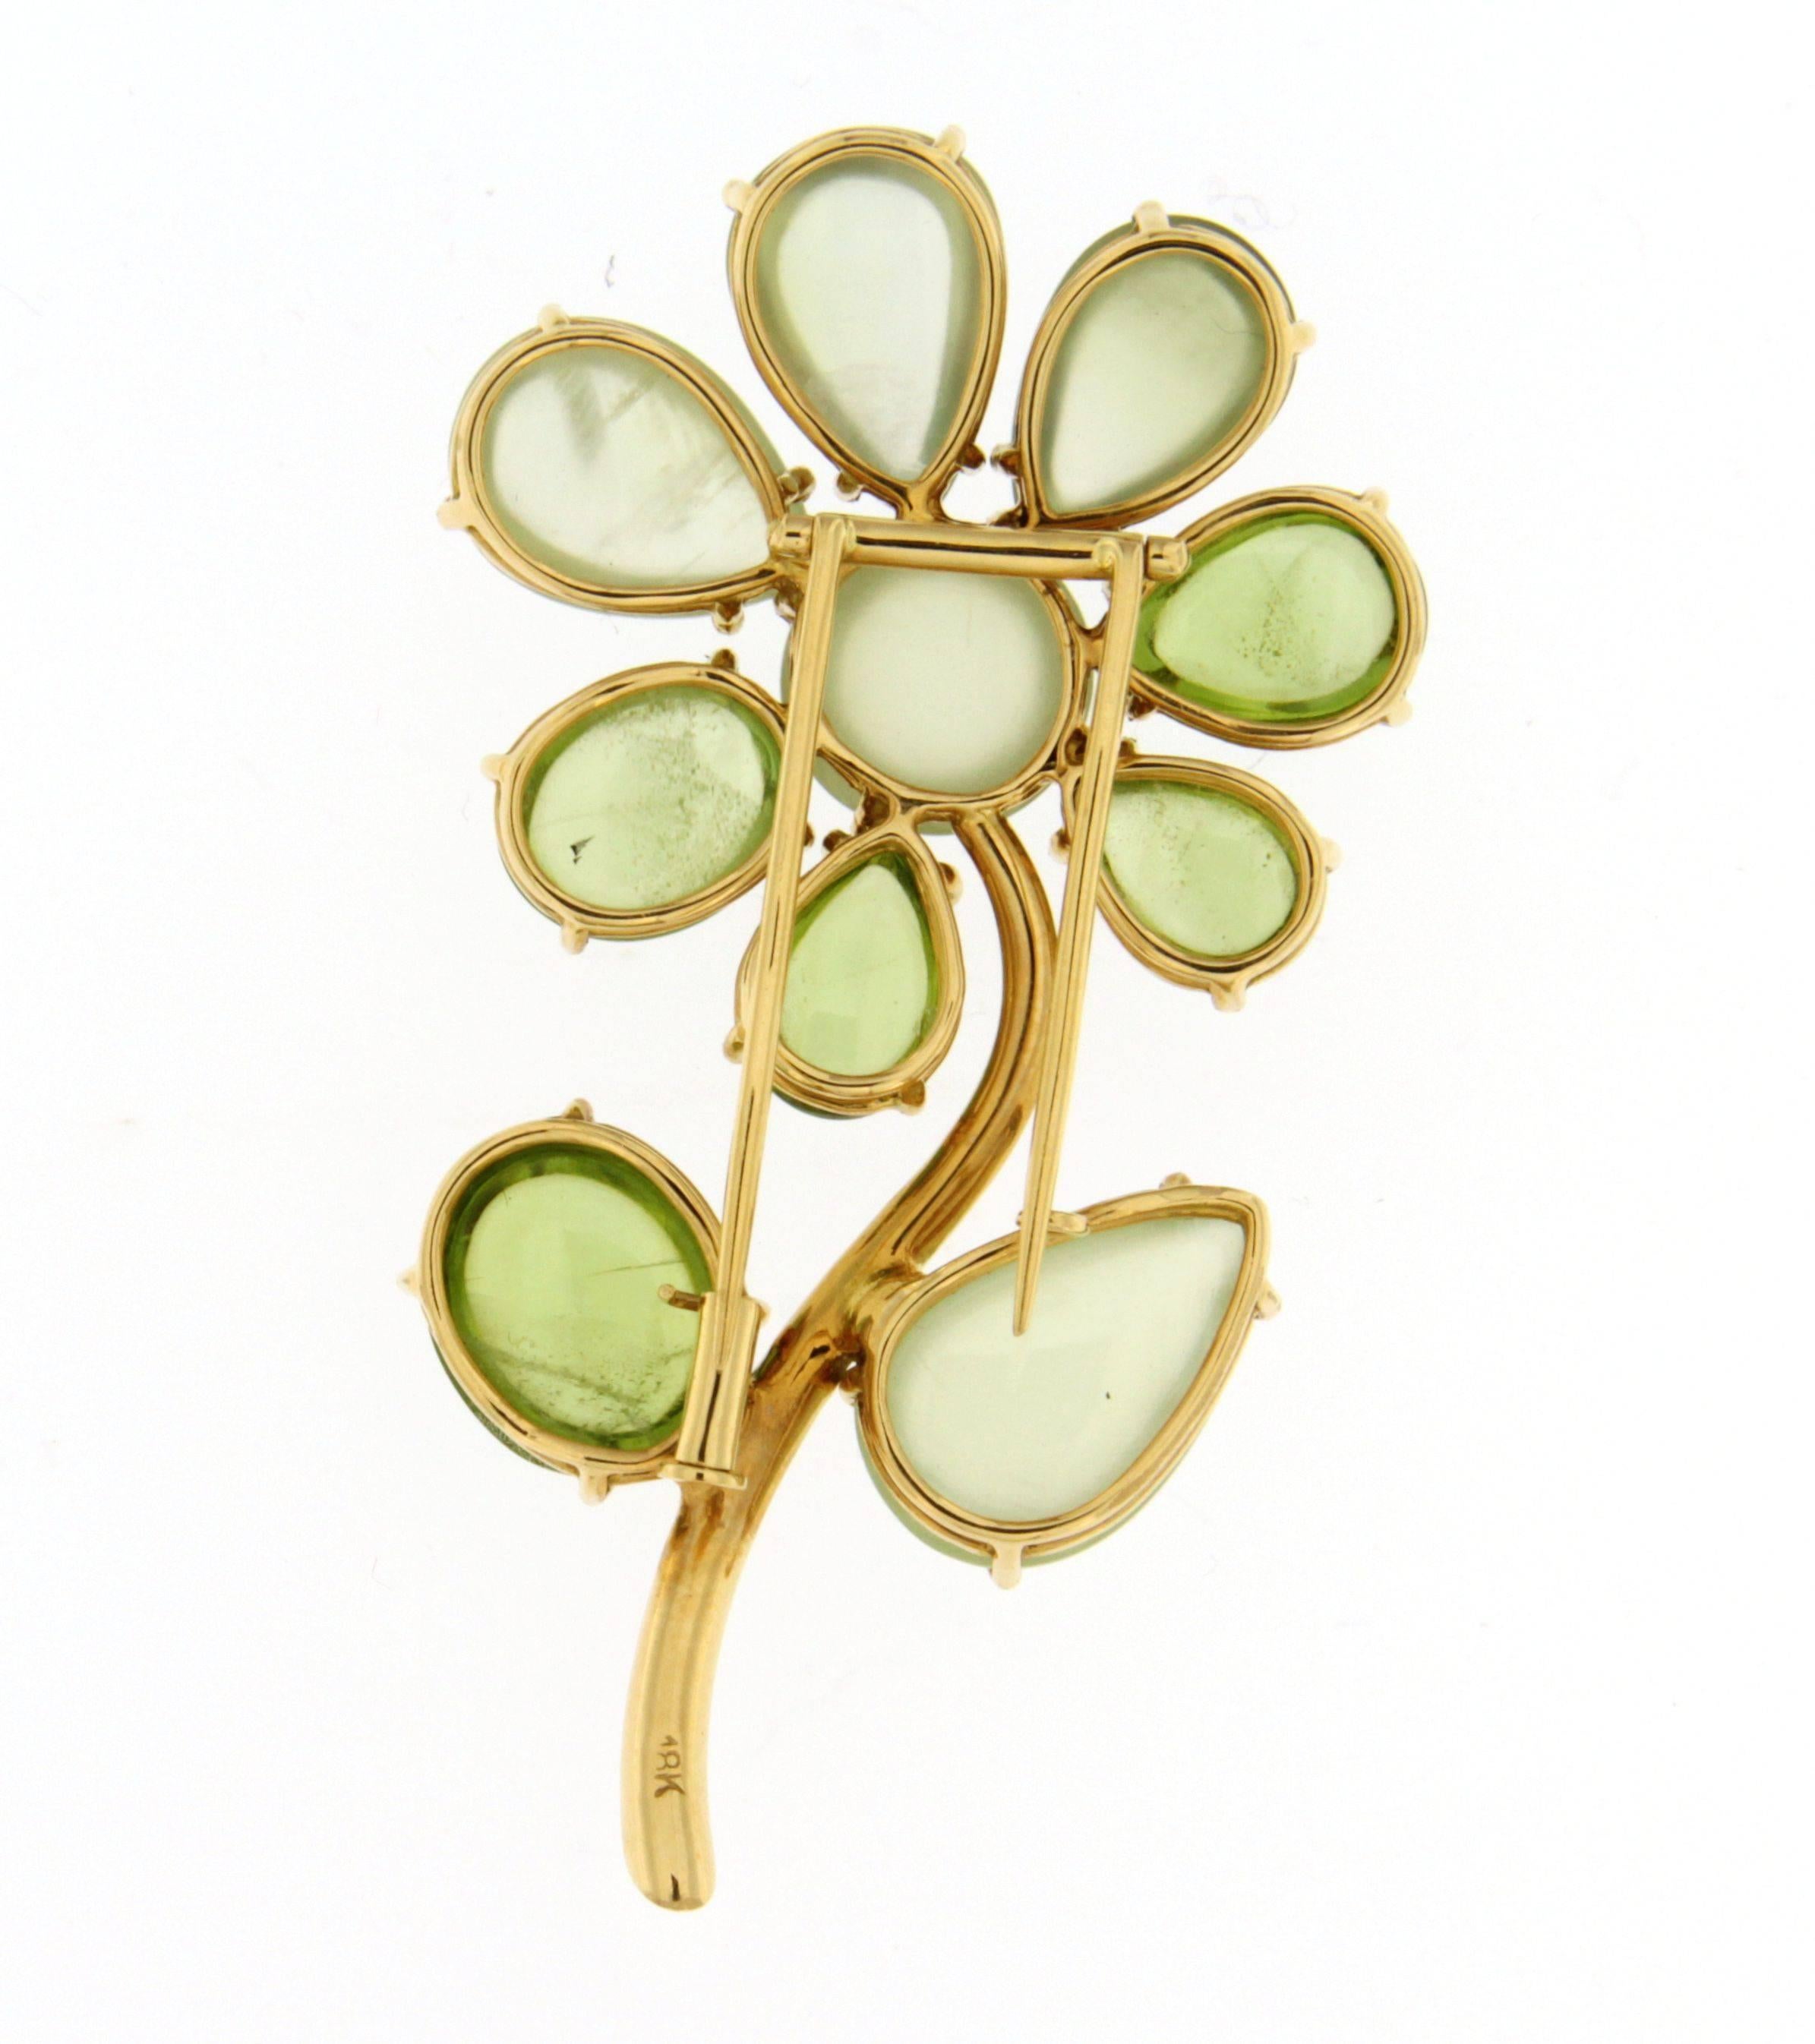 Jona design collection, hand crafted in Italy, 18 karat yellow gold flower brooch, showcasing 31.77 total carats of cabochon peridots and prehnites, enriched with a white diamond at the stem base.  
All Jona jewelry is new and has never been